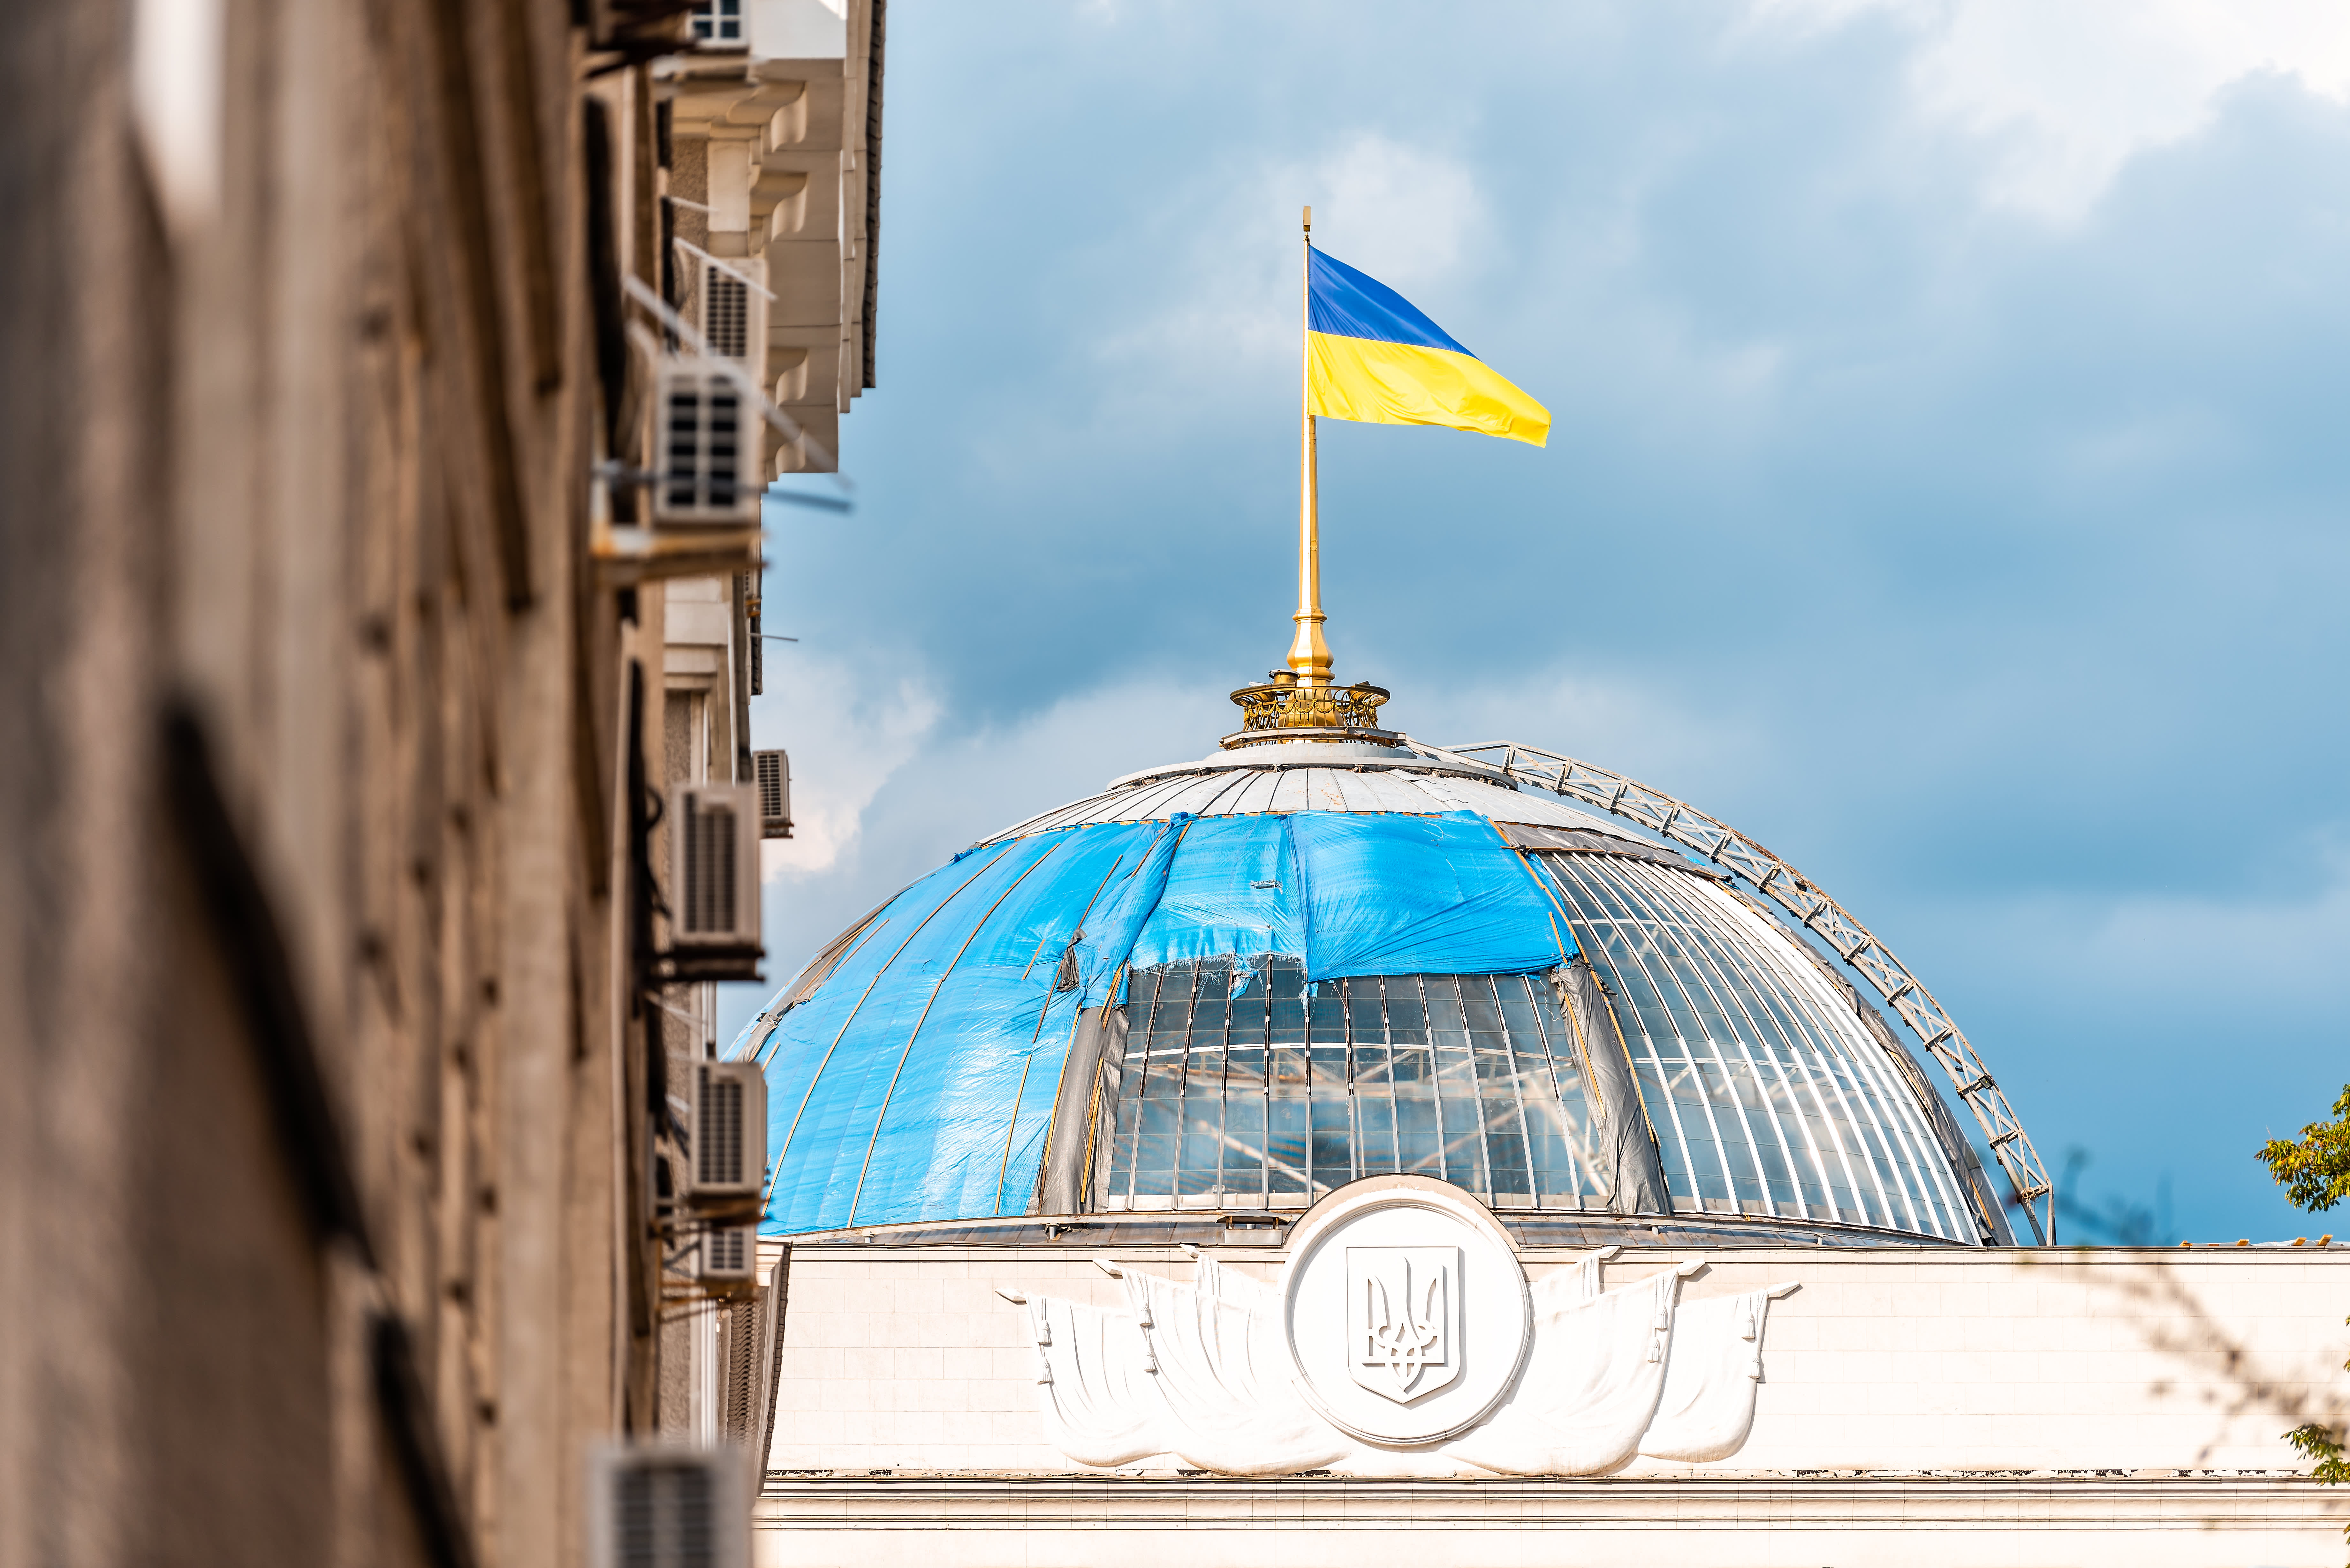 Ukraine is the latest country to legalize bitcoin as the cryptocurrency slowly goes global